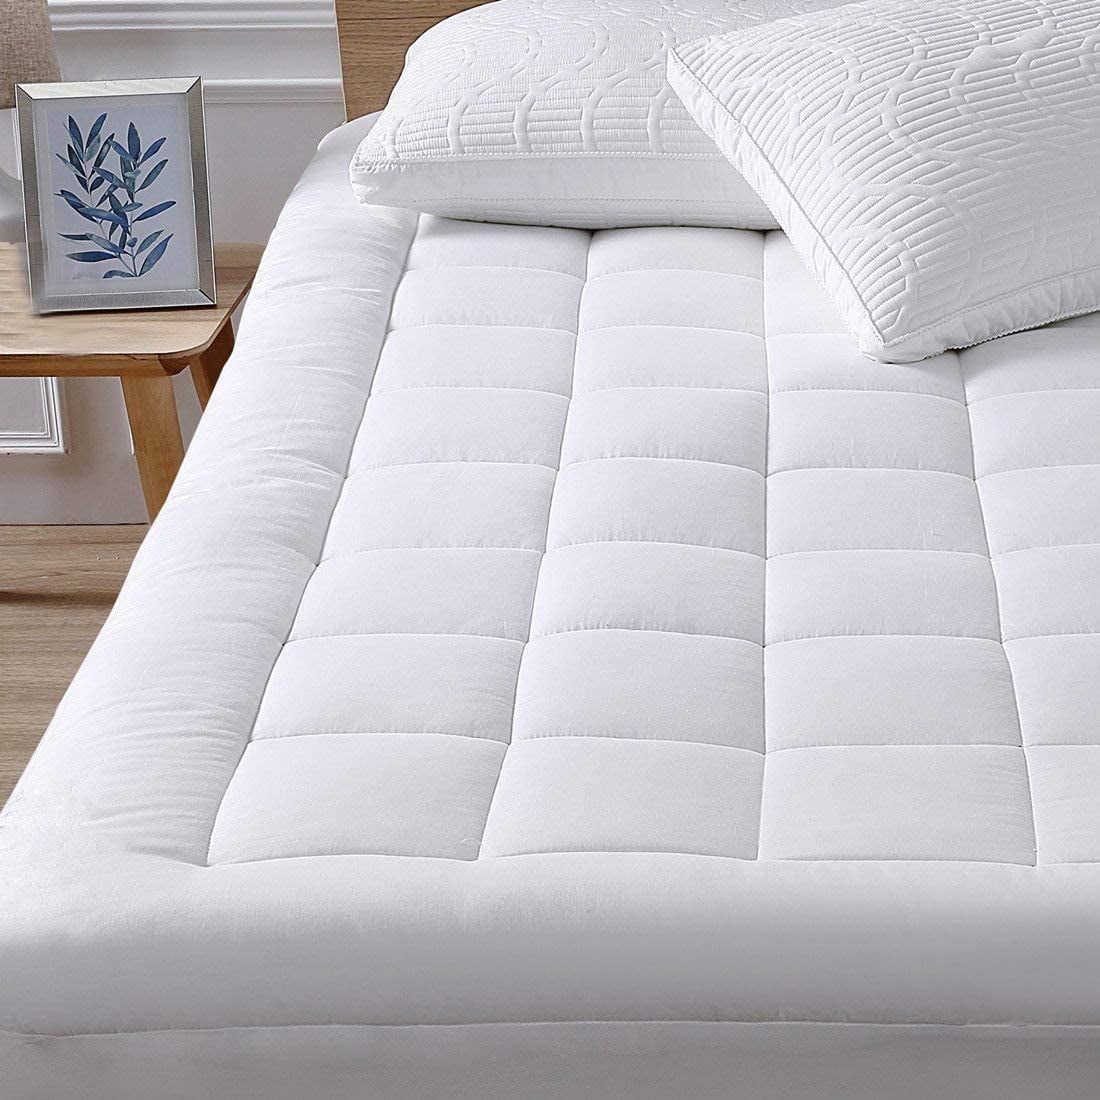 2PCS QUILTED MATTRESS PROTECTOR TOPPER LUXURY FITTED COVER FULL KING CK SIZE RE